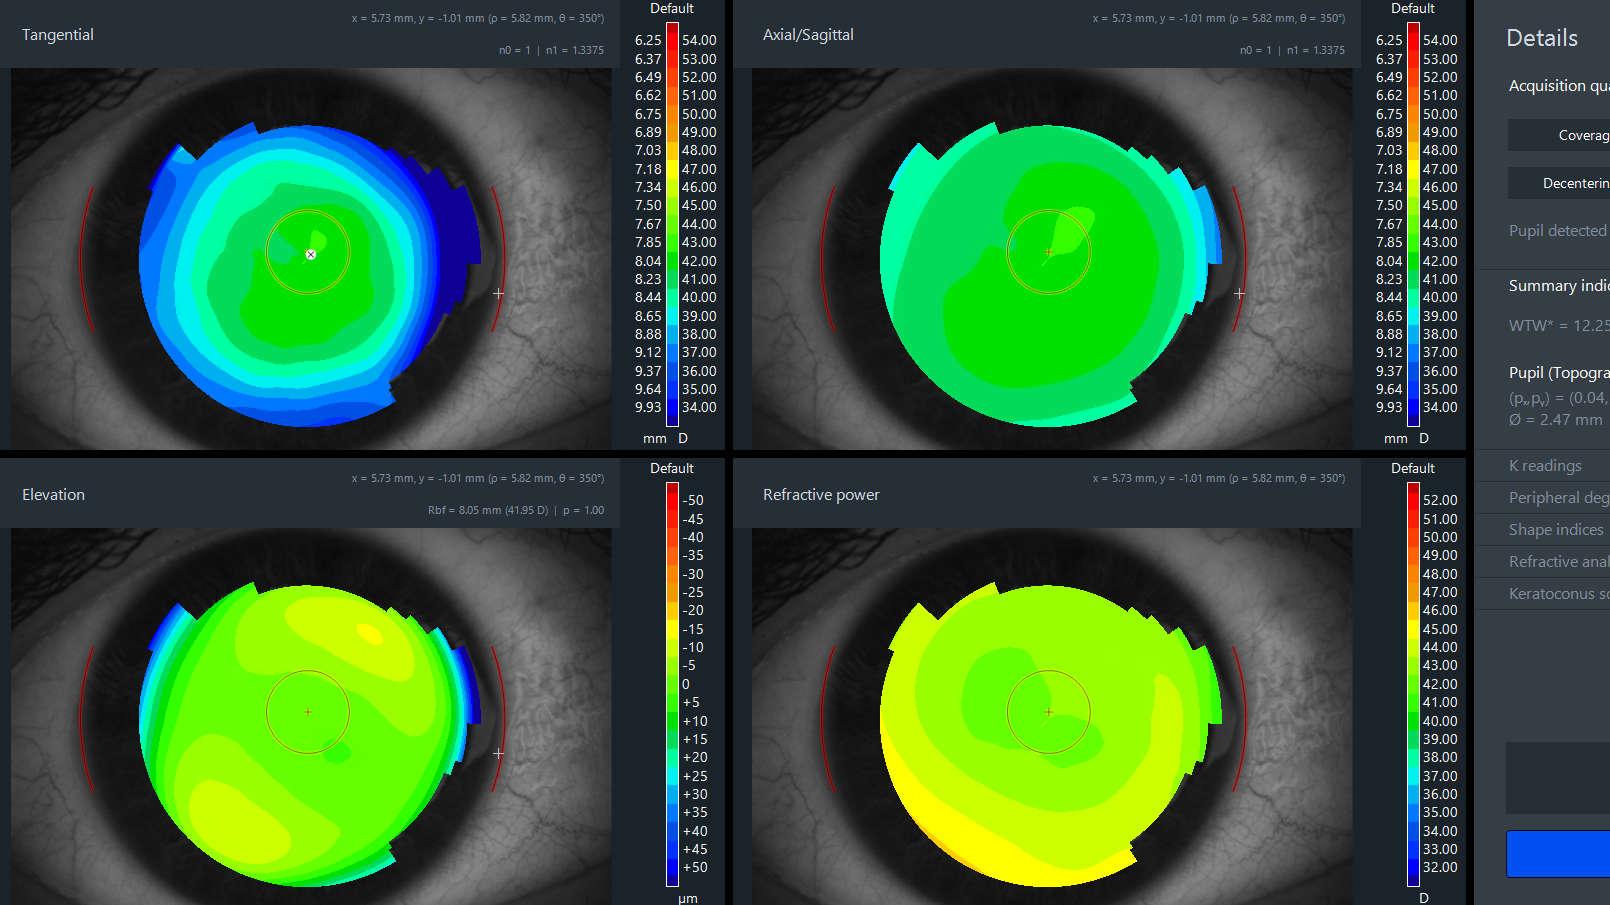 Image from ZEISS Presbyopia Management: Assess & Educate